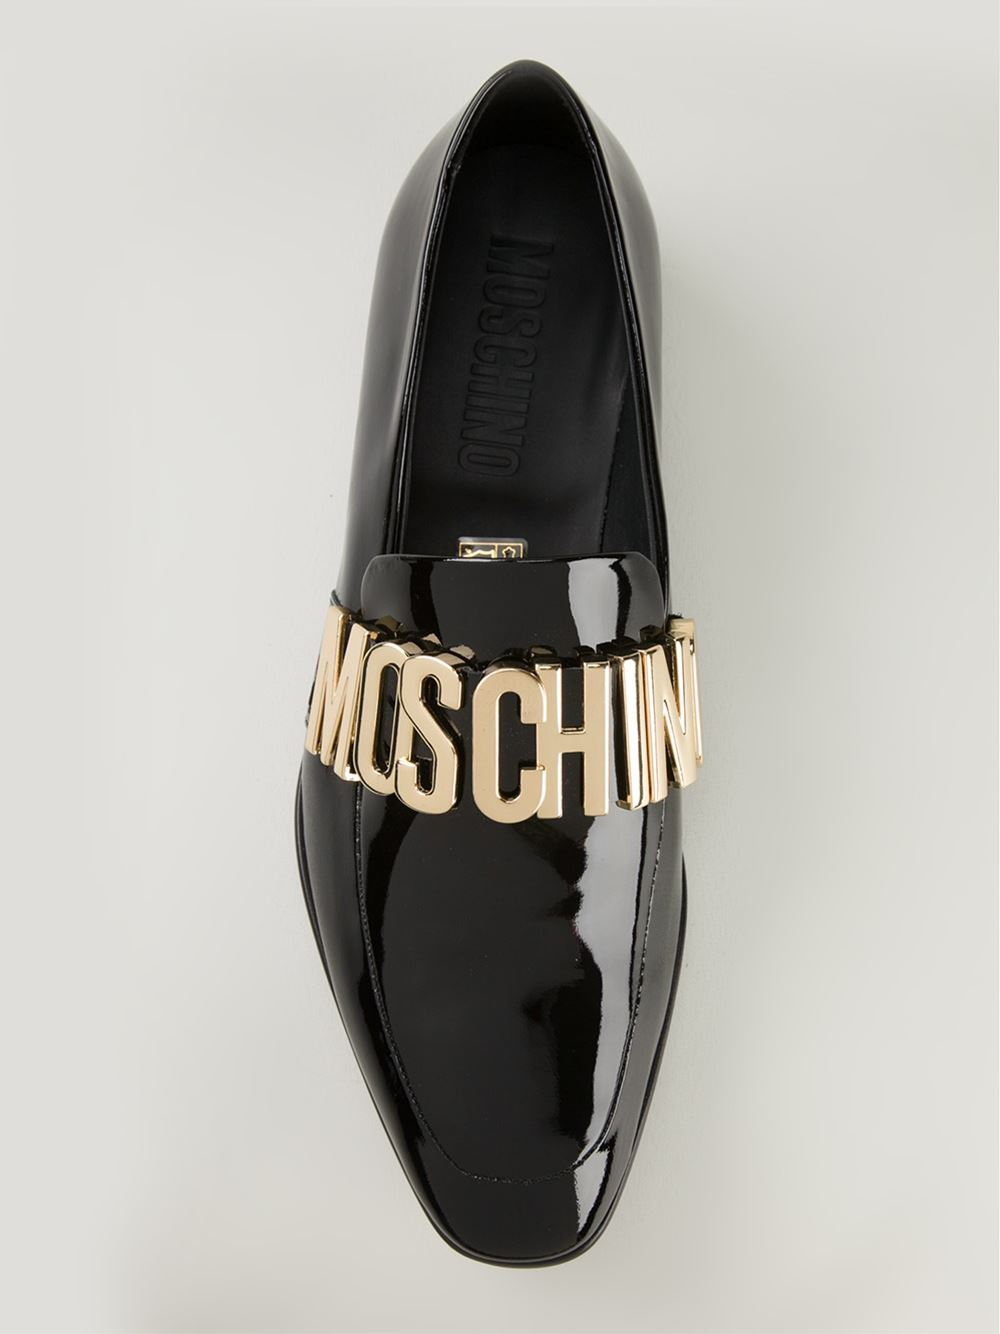 Moschino Logo Plaque Slippers in Black for Men - Lyst